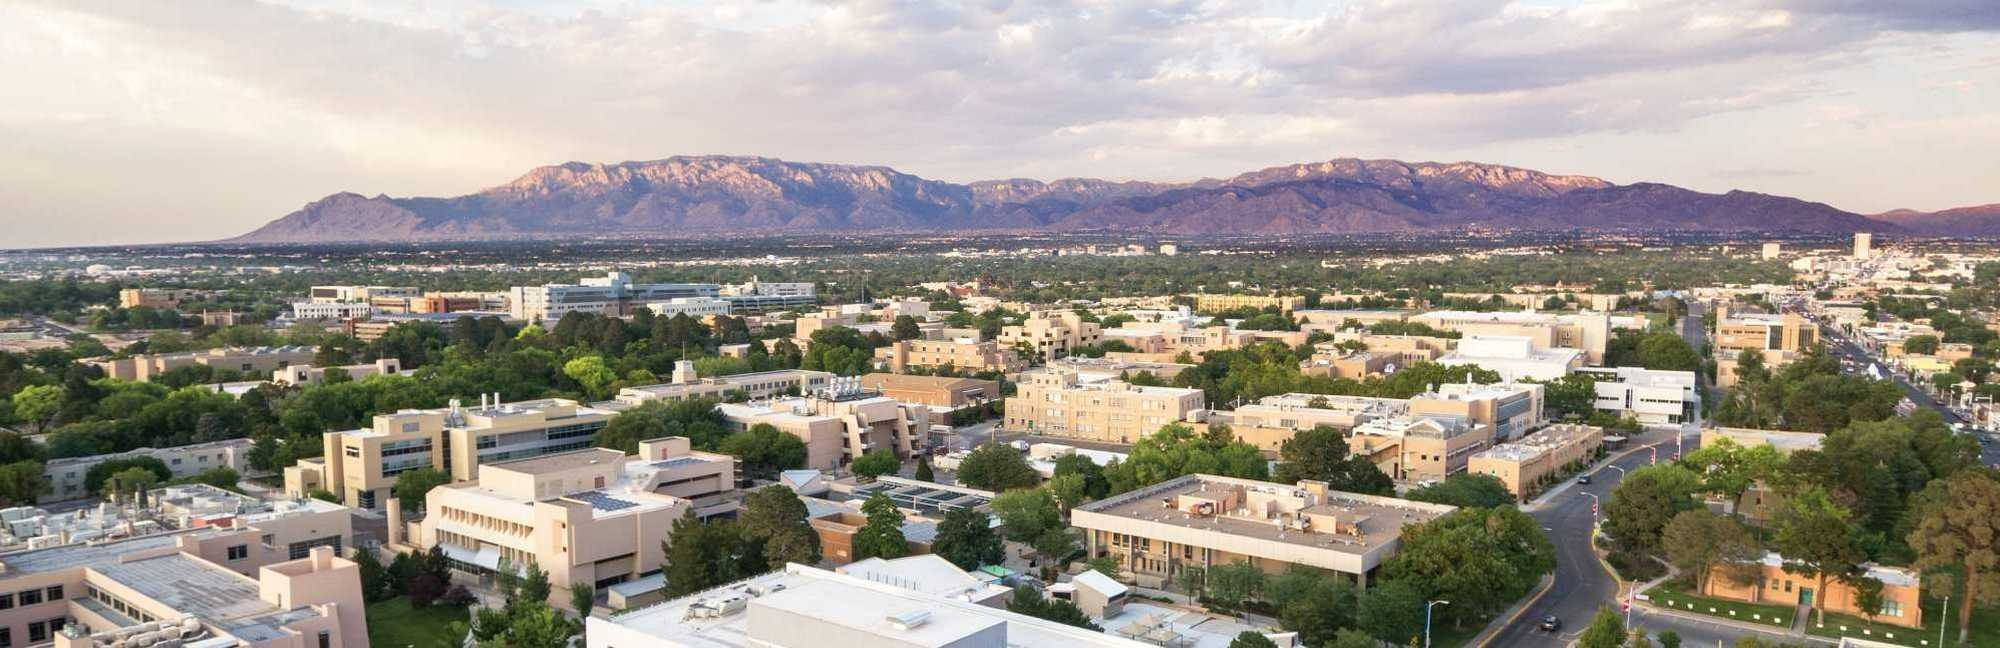 University Of New Mexico Campus View Wallpaper